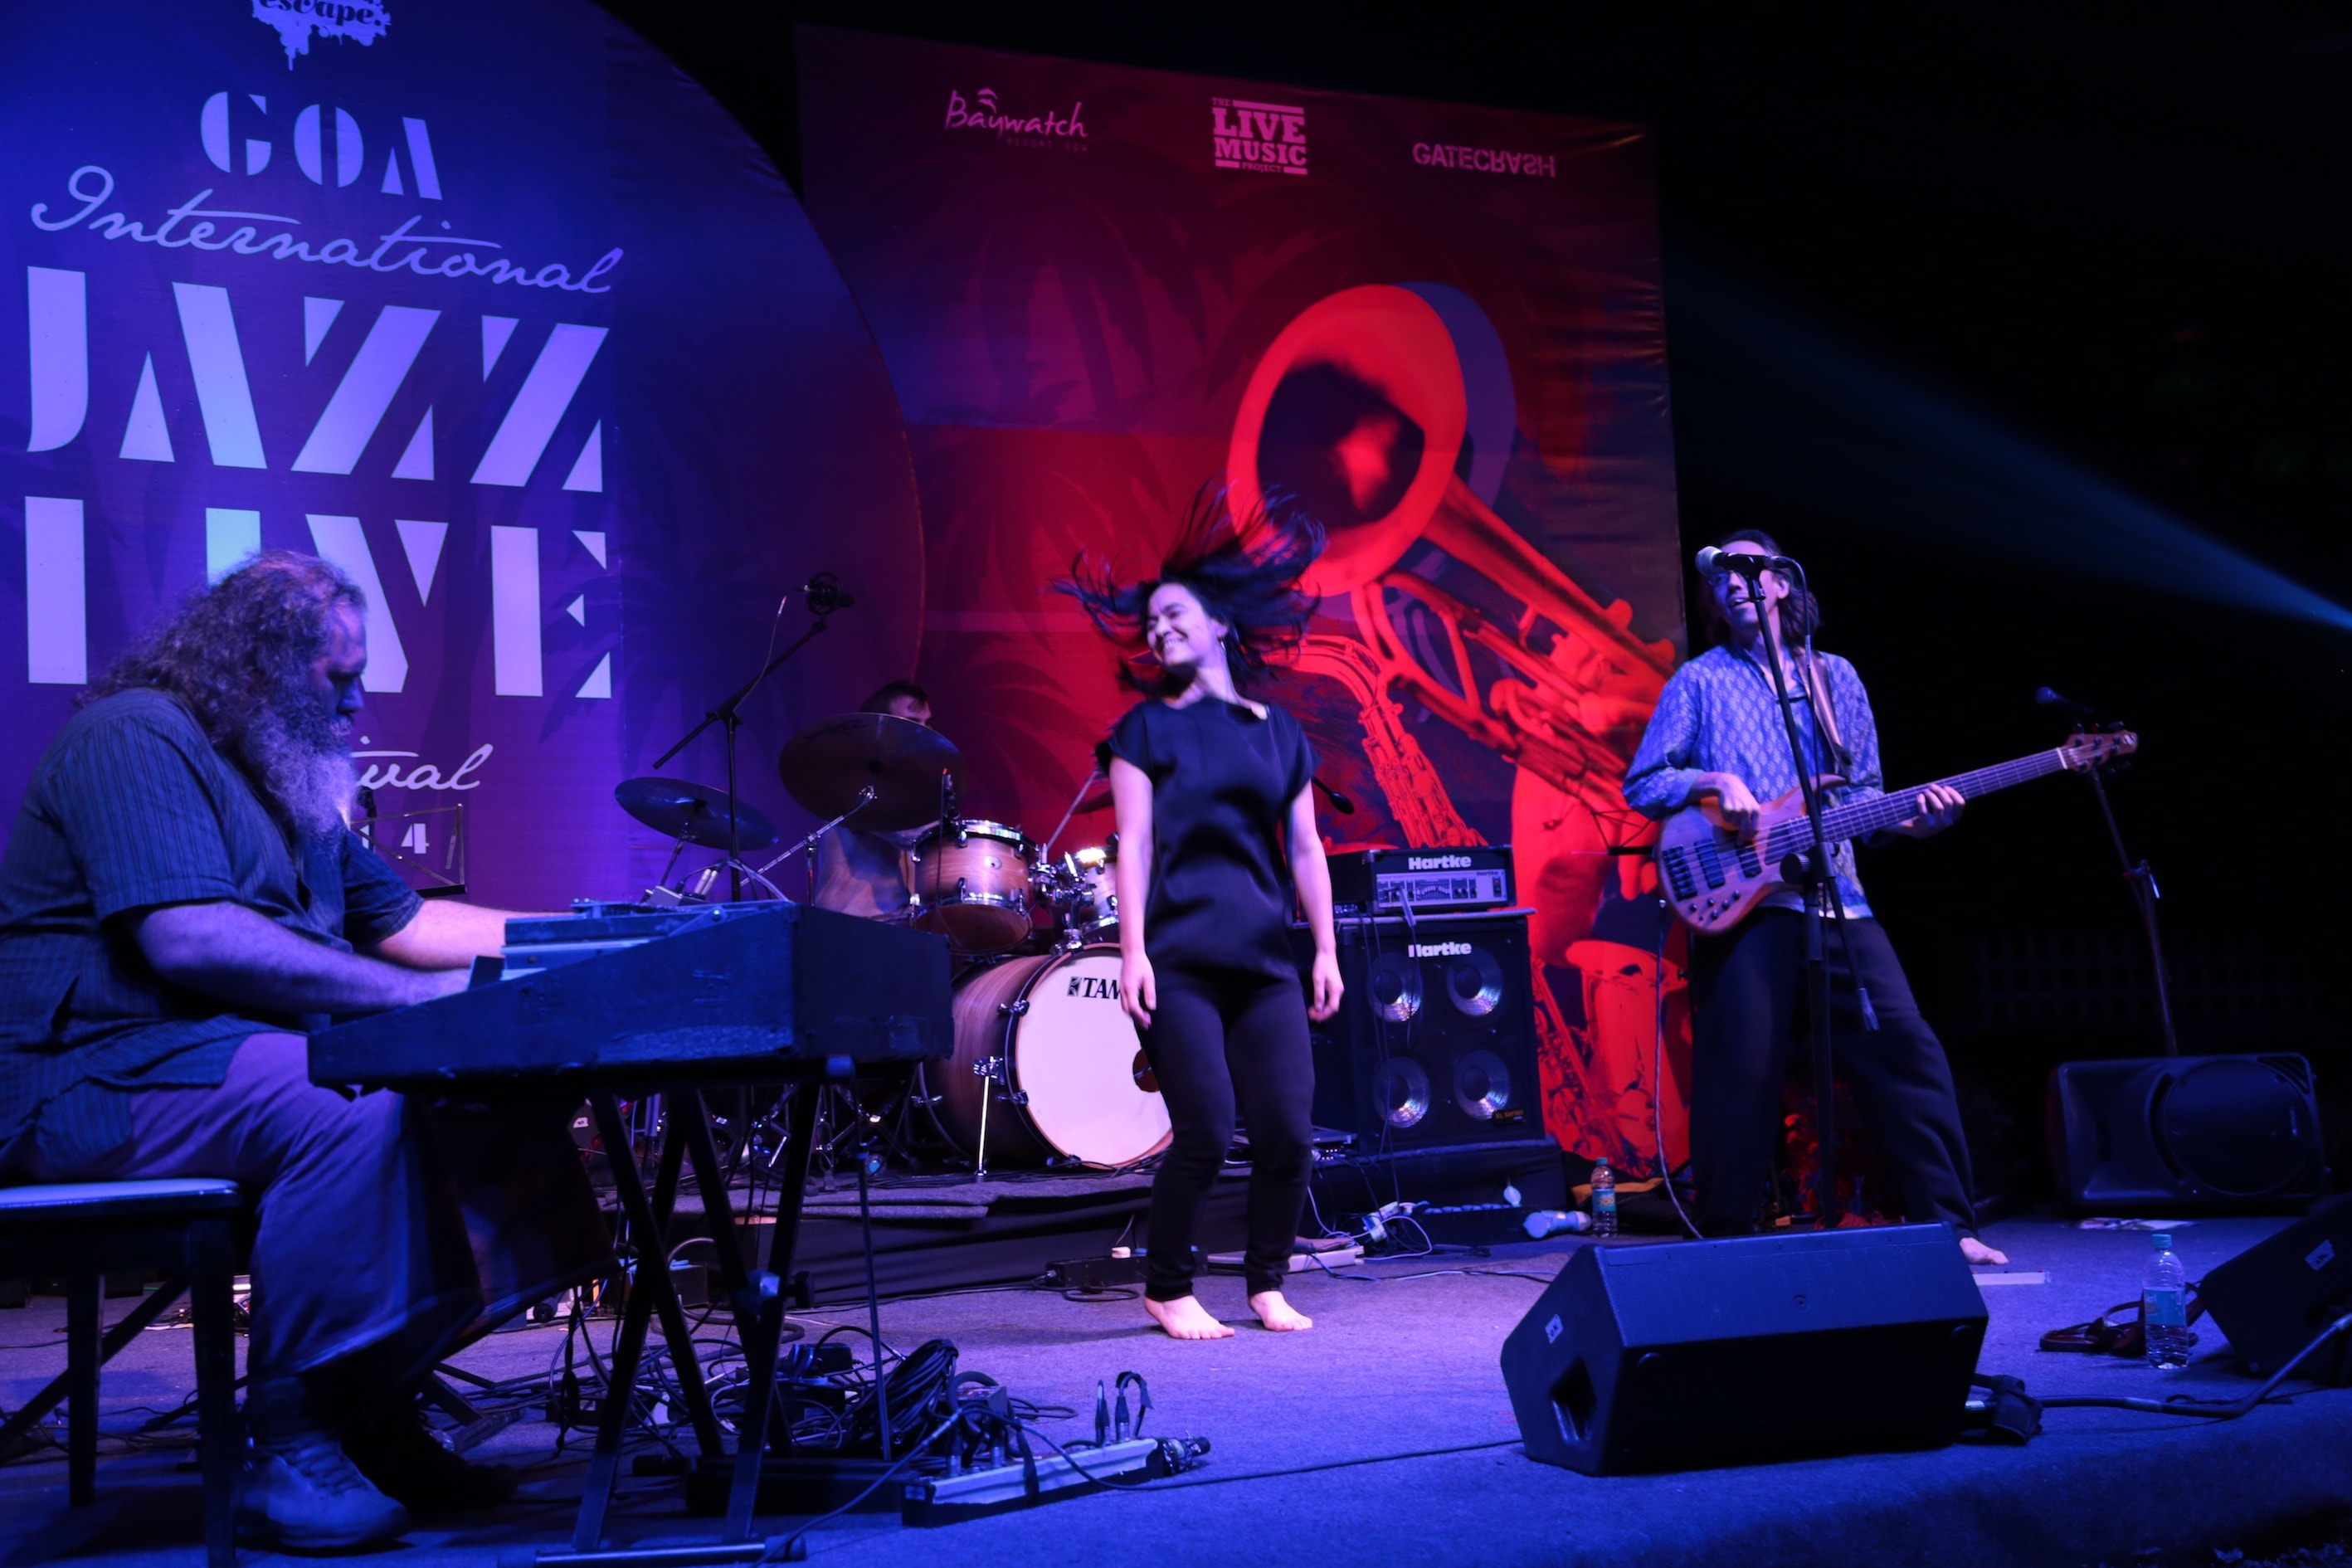 You are currently viewing Meet The New Age Jazz Cats From 10 Countries At The Goa Intearnational Jazz Live Festival Edition 3 27-28-29 Nov